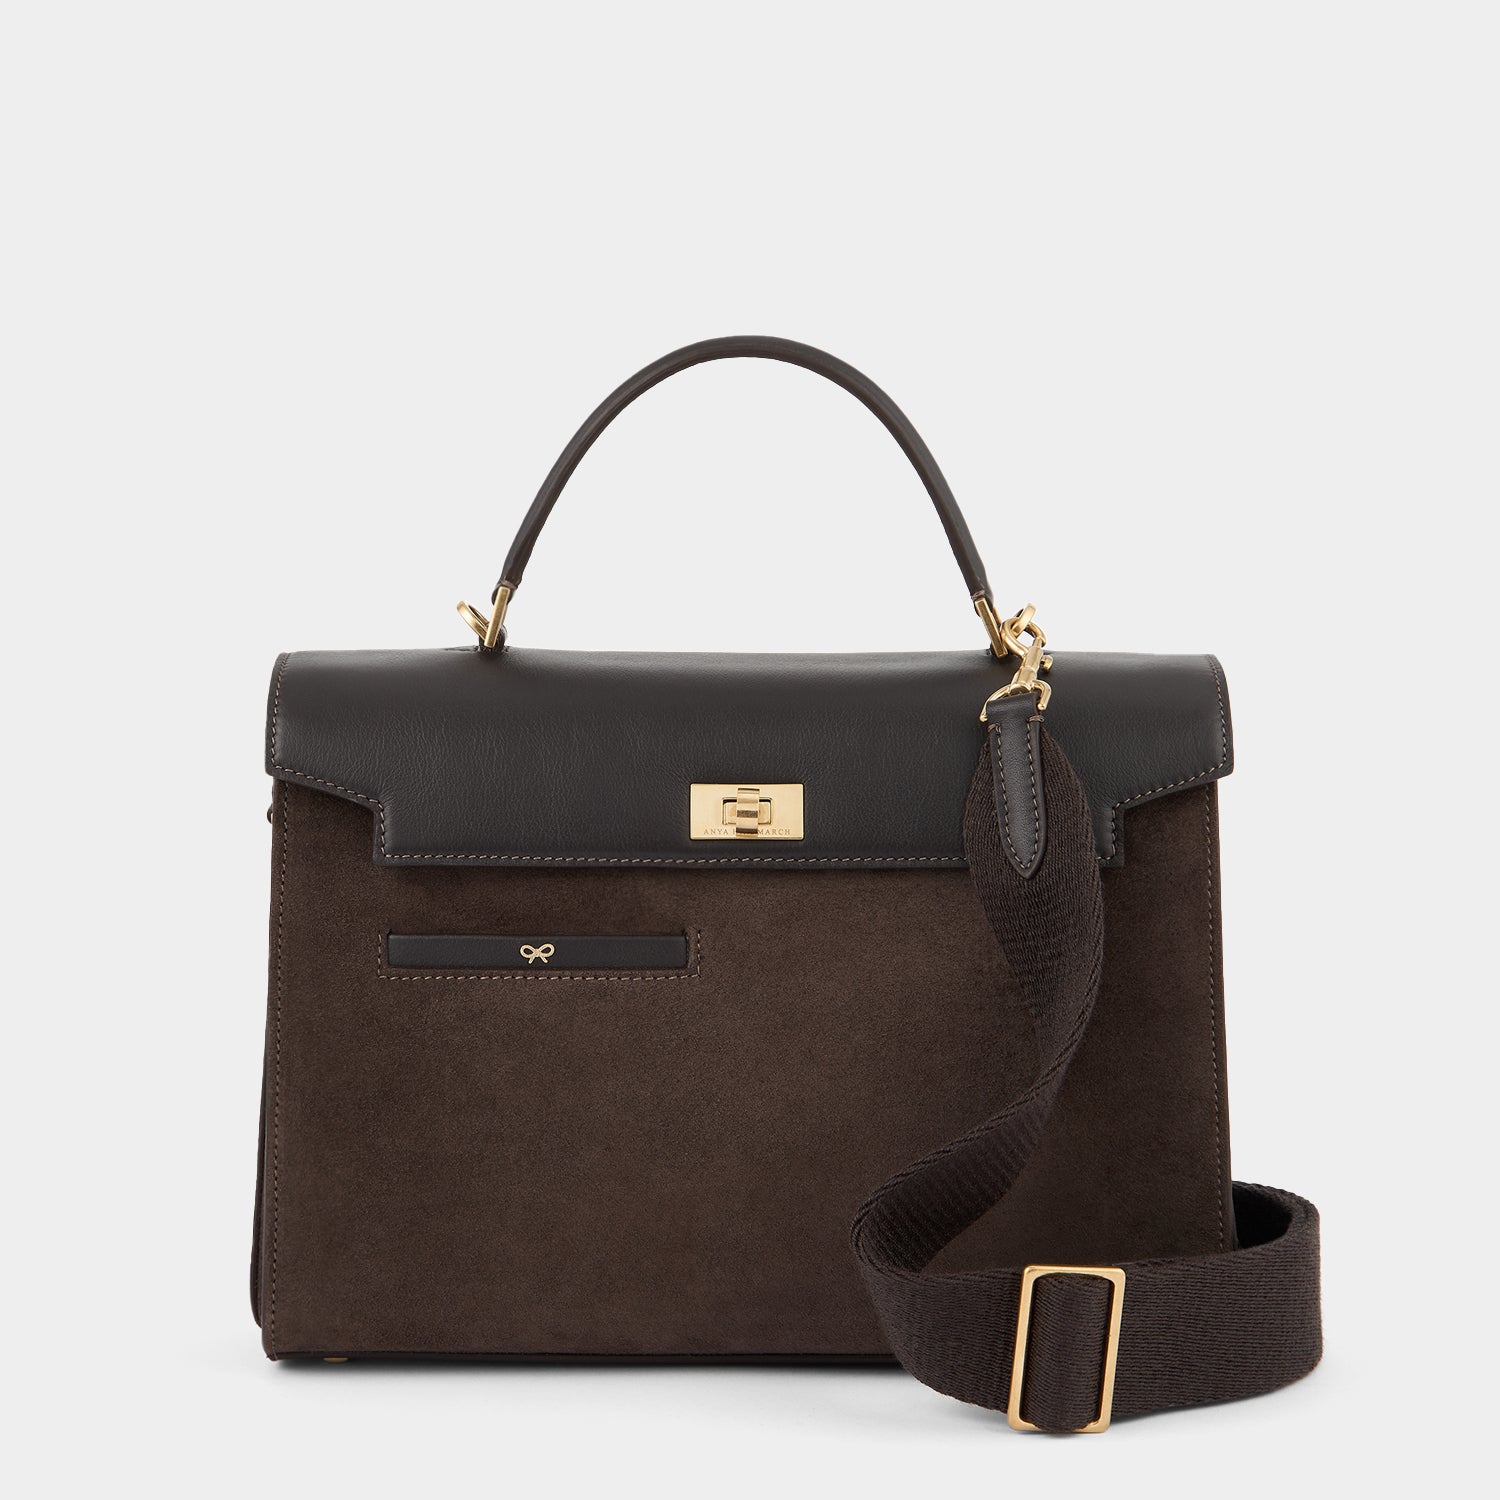 Mortimer -

                  
                    Leather in Espresso -
                  

                  Anya Hindmarch UK
